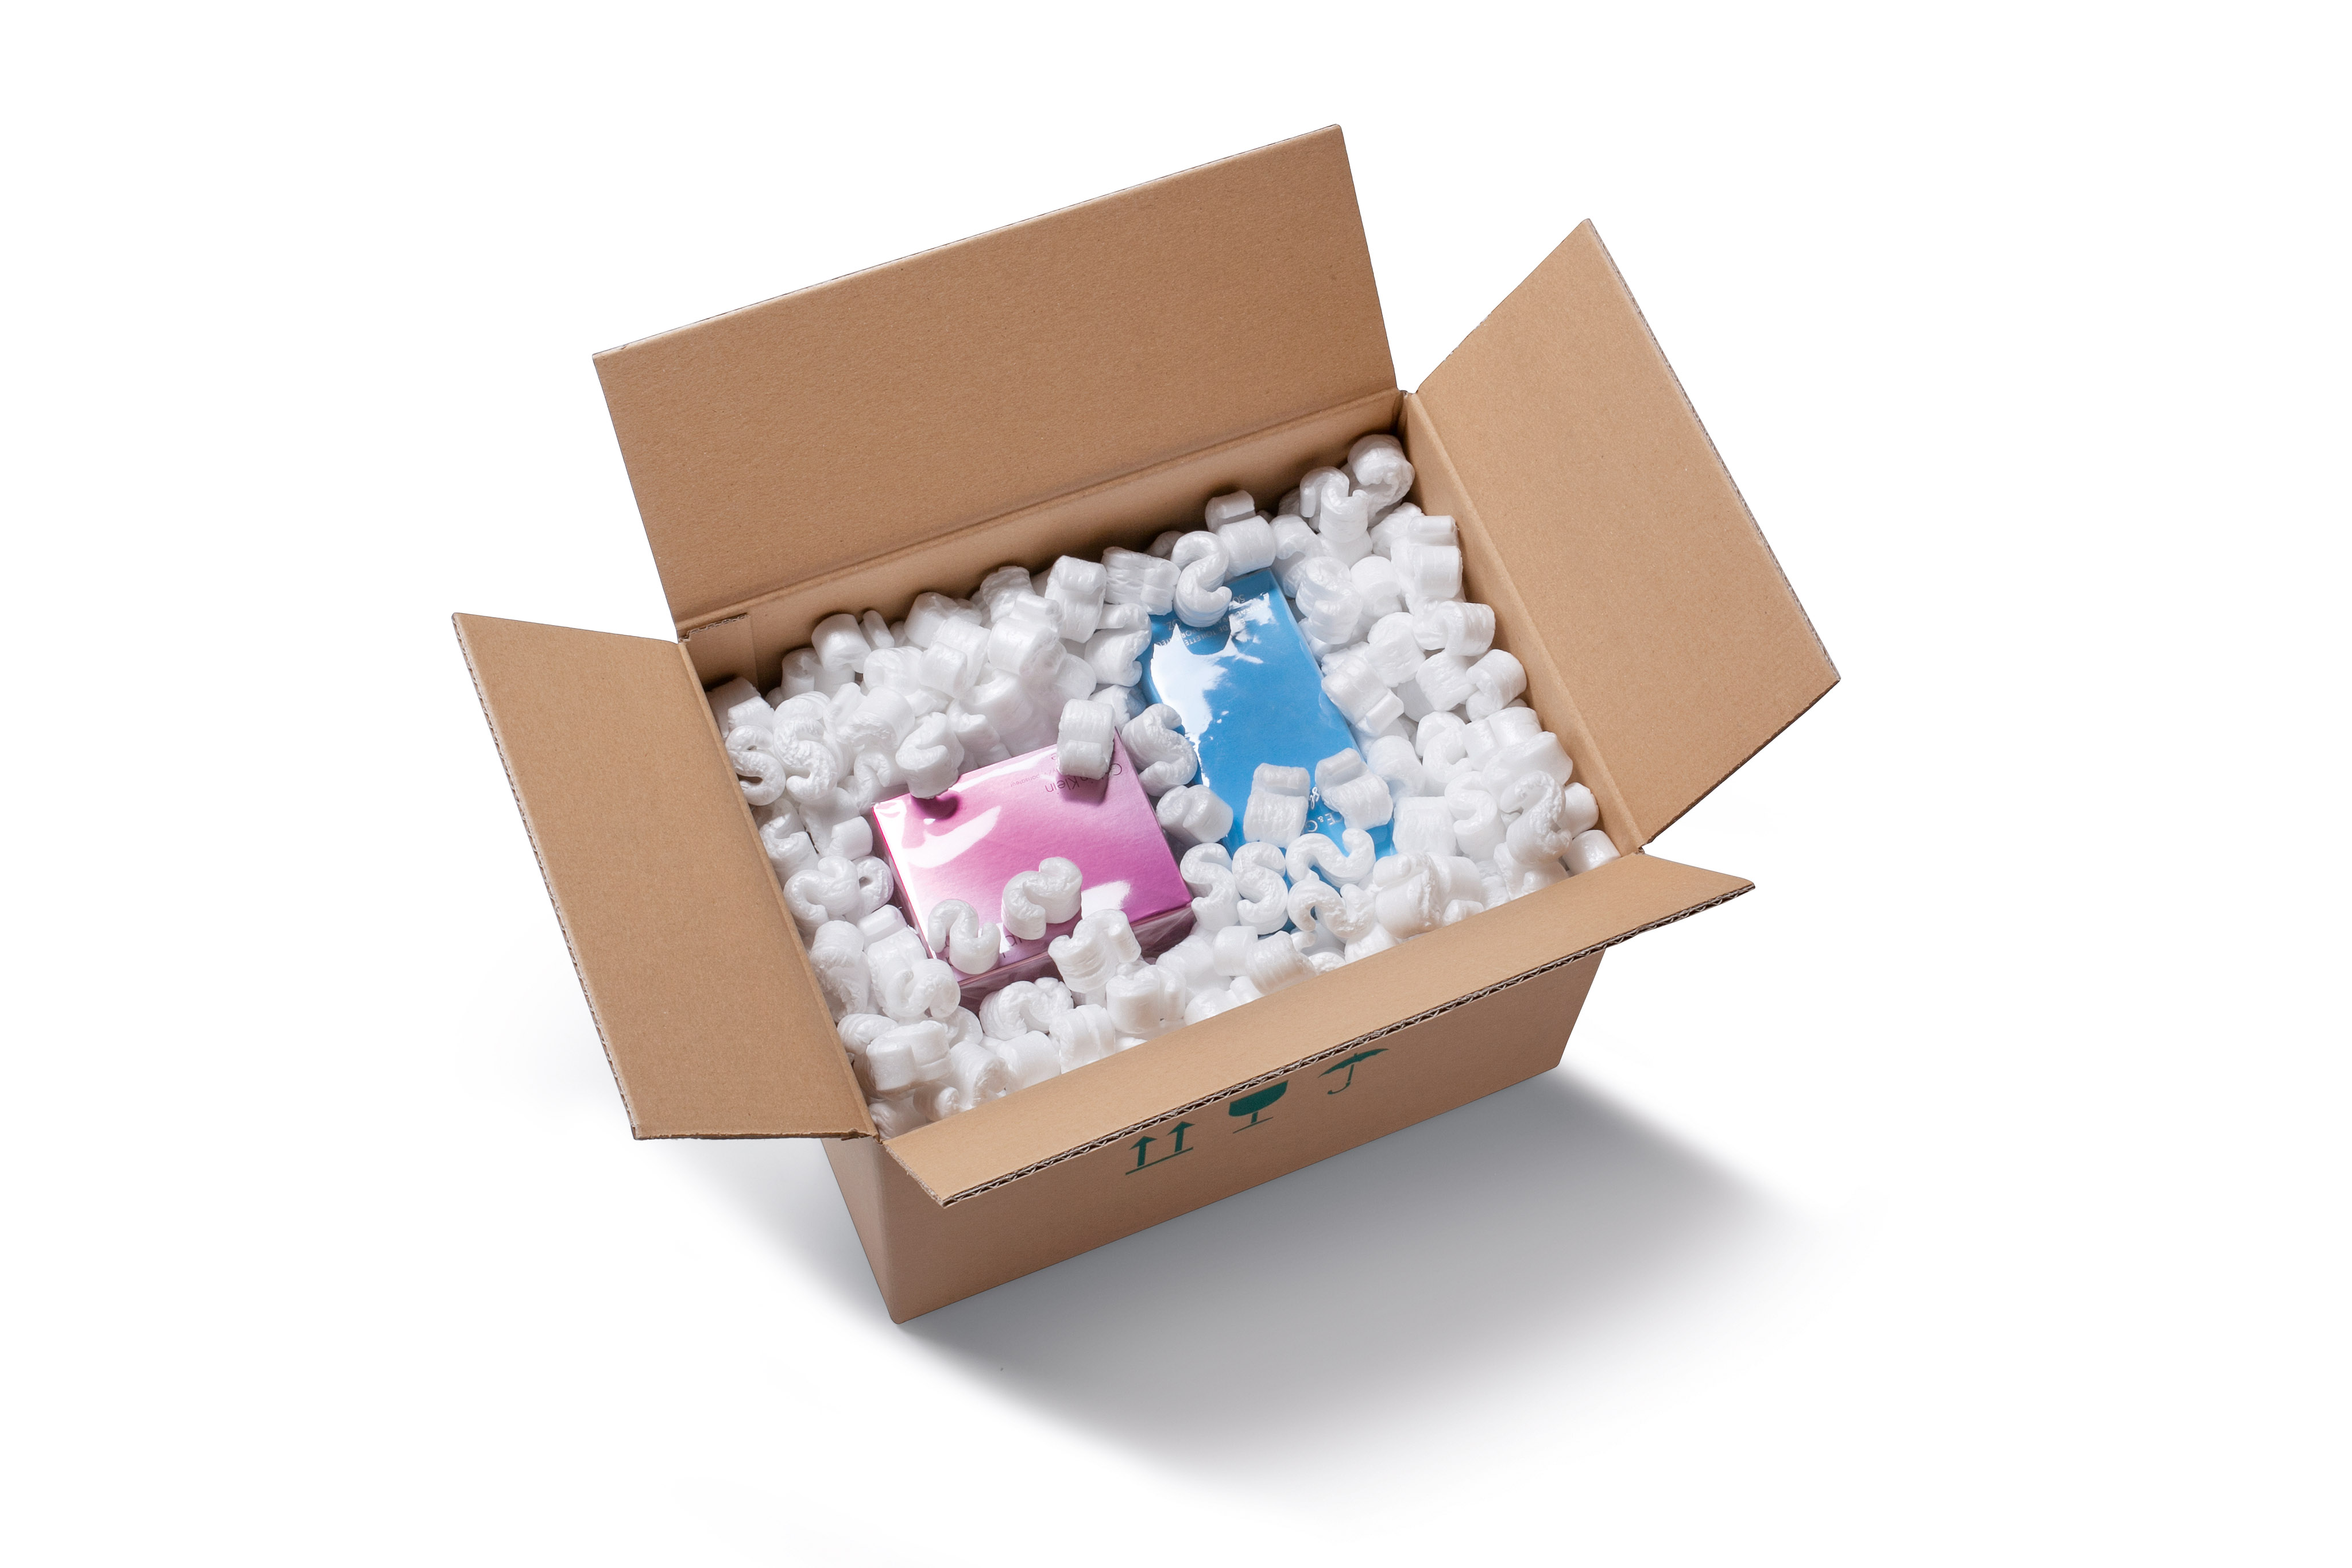 Made from 100% recycled plastic, PELASPAN® PAC packaging chips are a sustainable packaging solution. EPS packaging peanuts are made up of 98% air and 2% polystyrene, making them an especially attractive solution for eco-friendly, lightweight, and safe shipment of goods. Image: Storopack